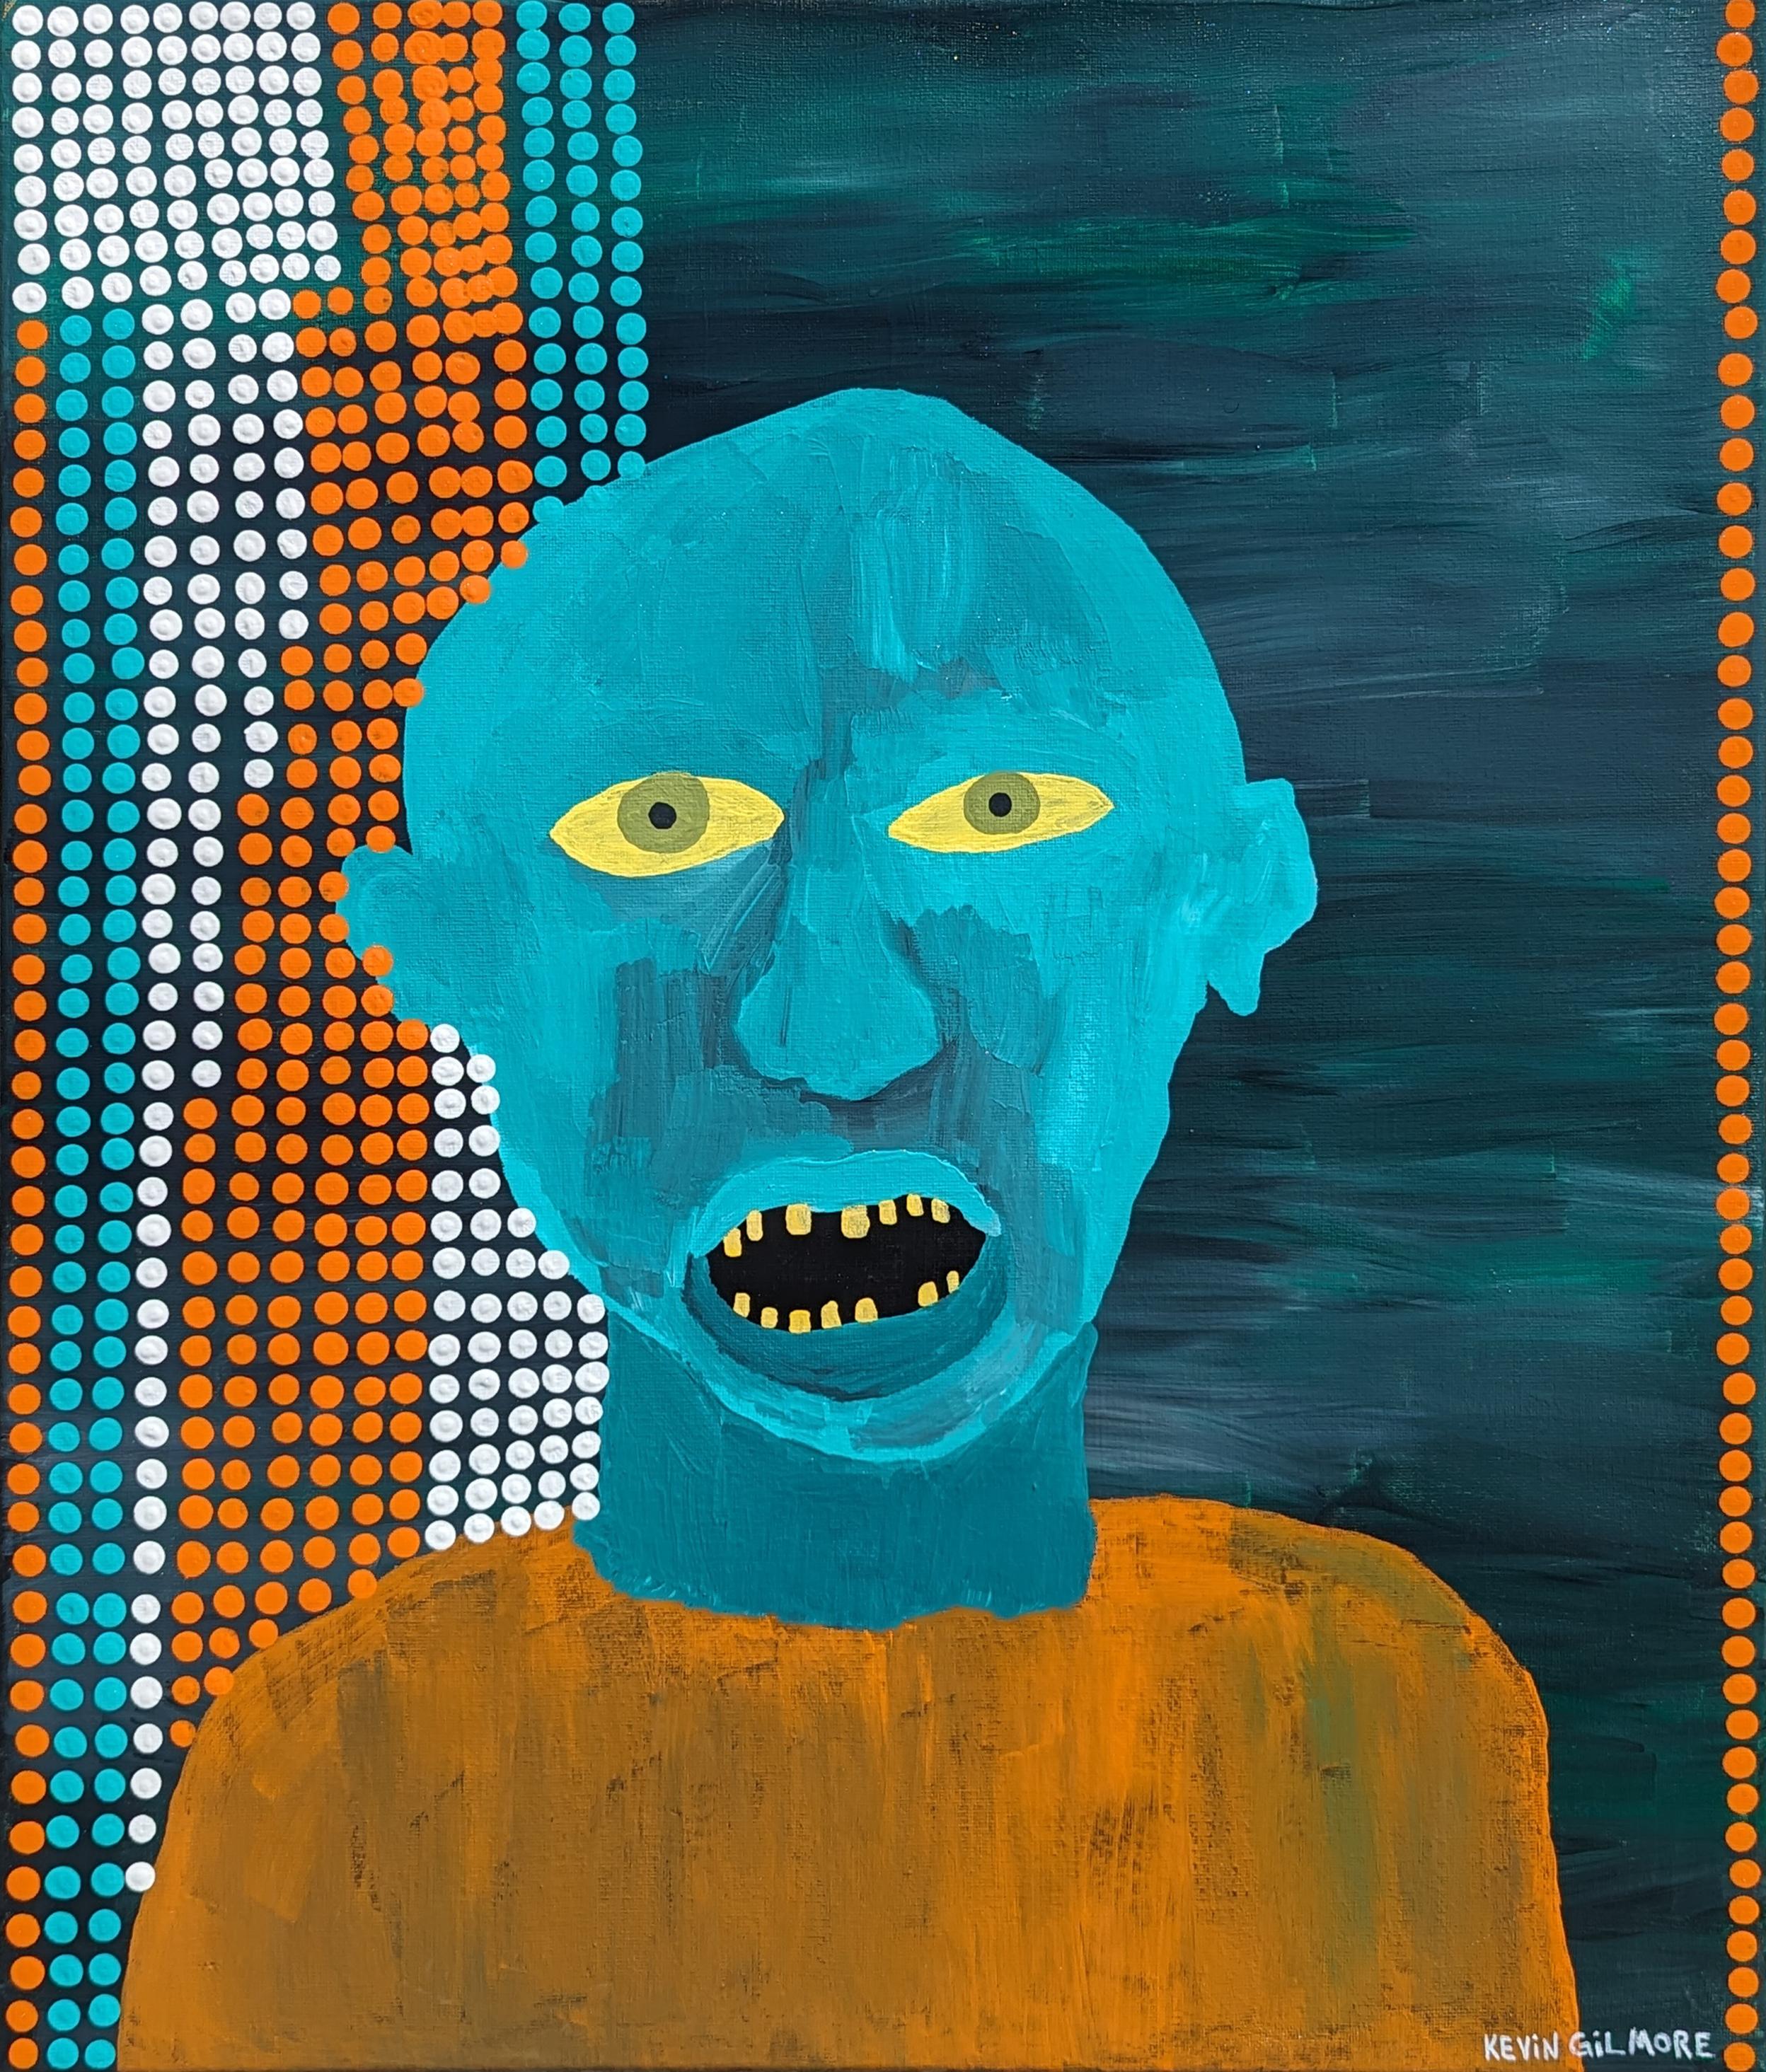 Kevin Gilmore Portrait Painting – "Papunya" Contemporary Teal & Orange Toned Outsider Figurative Portrait Malerei